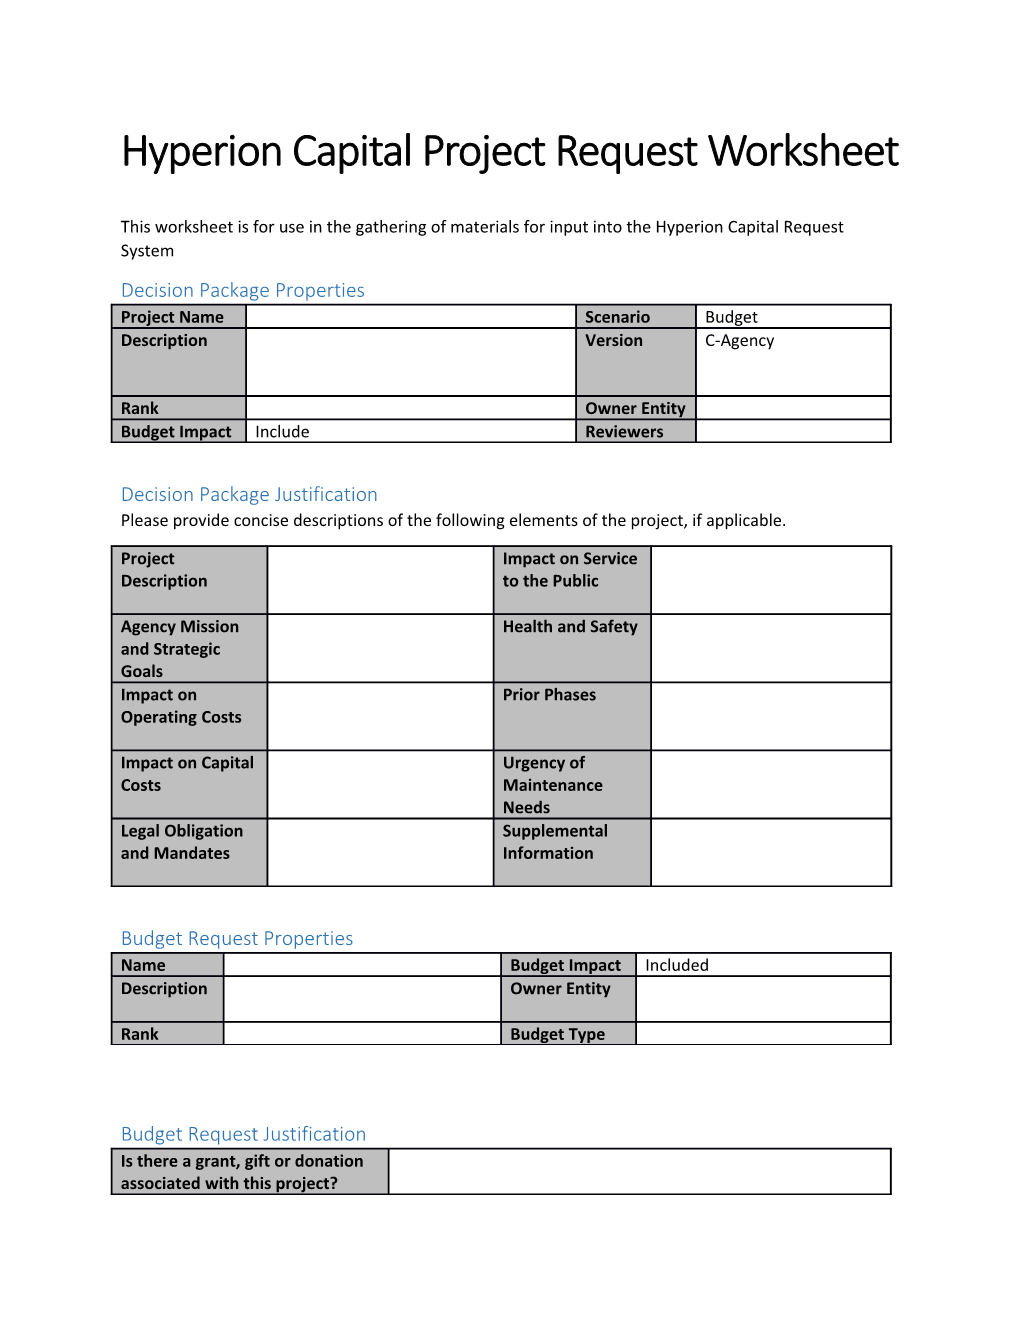 Hyperion Capital Project Request Worksheet